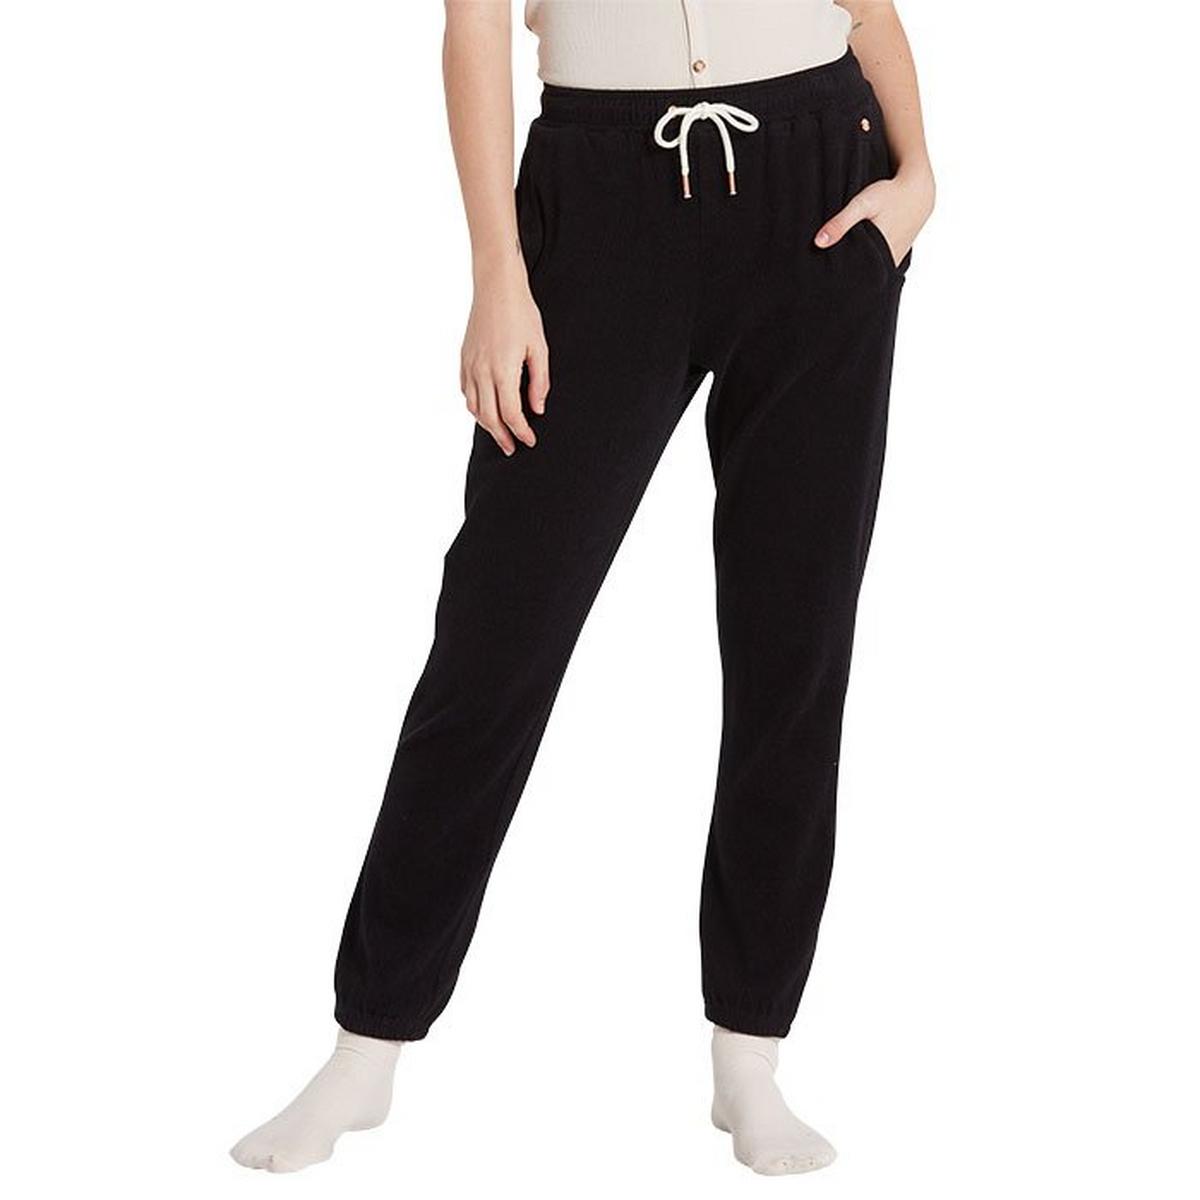 Women's Lived In Lounge Fleece Pant